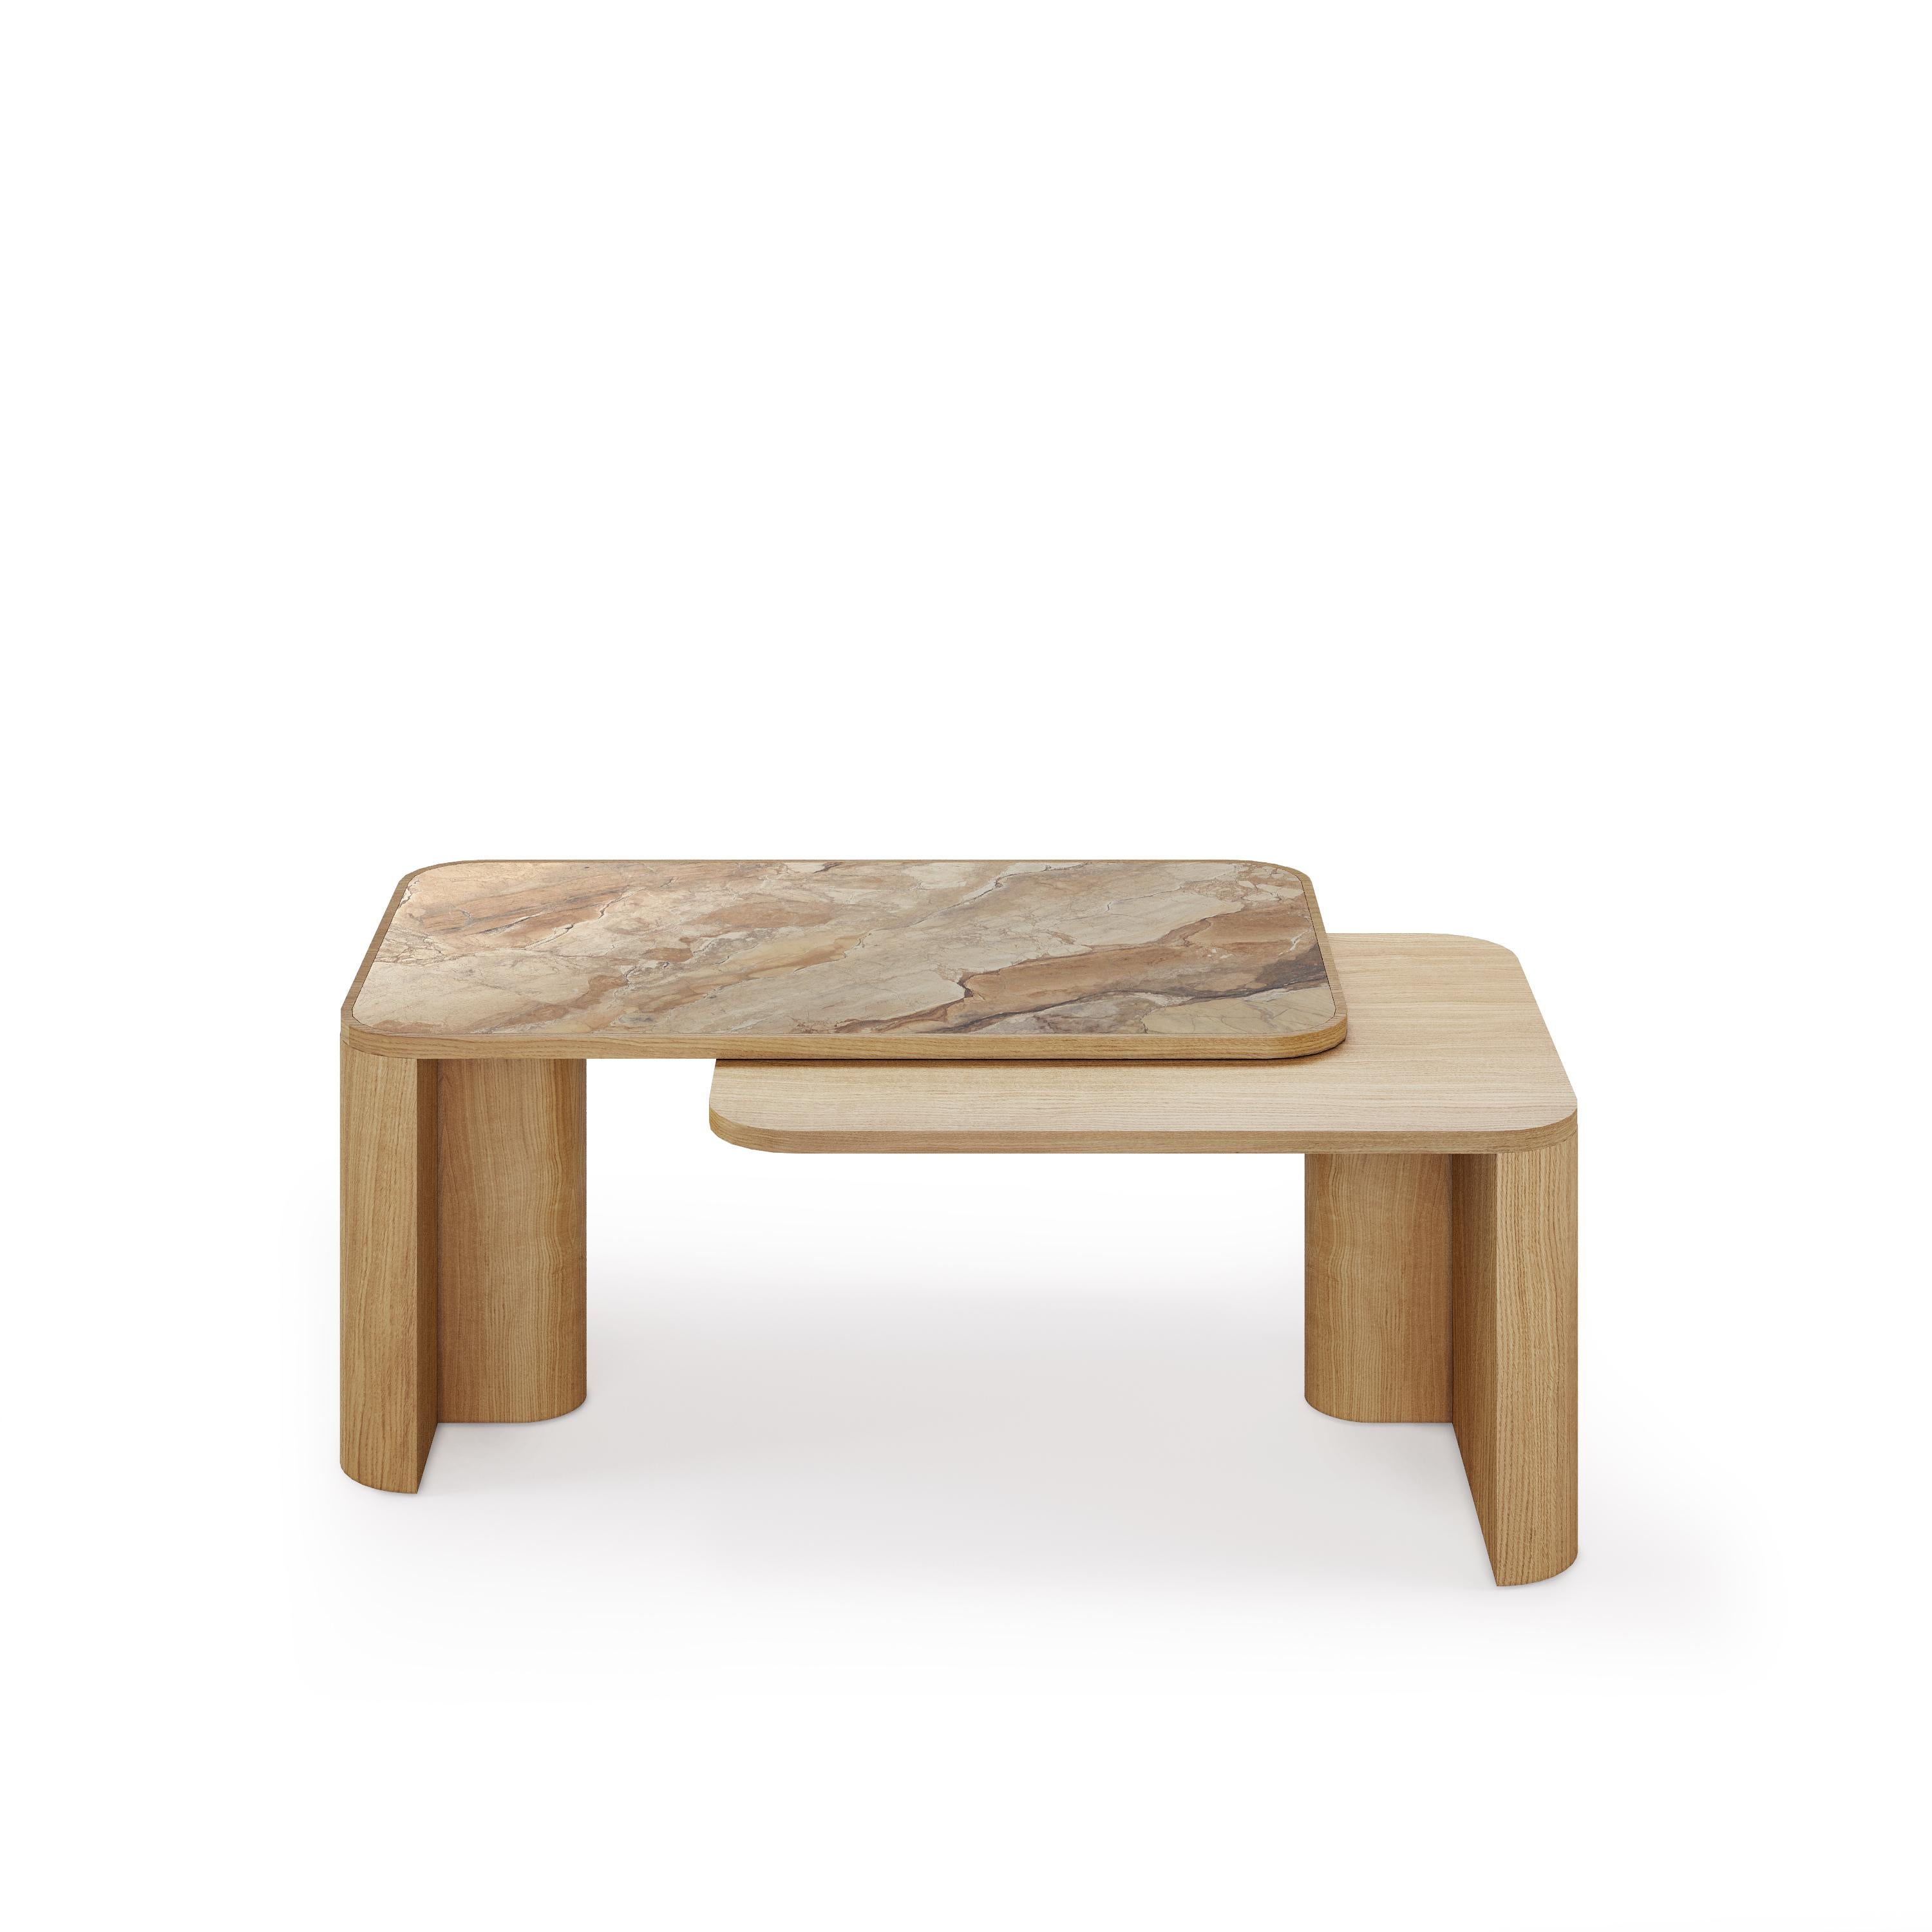 This contemporary coffee table is created with simplicity and longevity in mind. An innovative design and refreshing finishes for a surprising result.